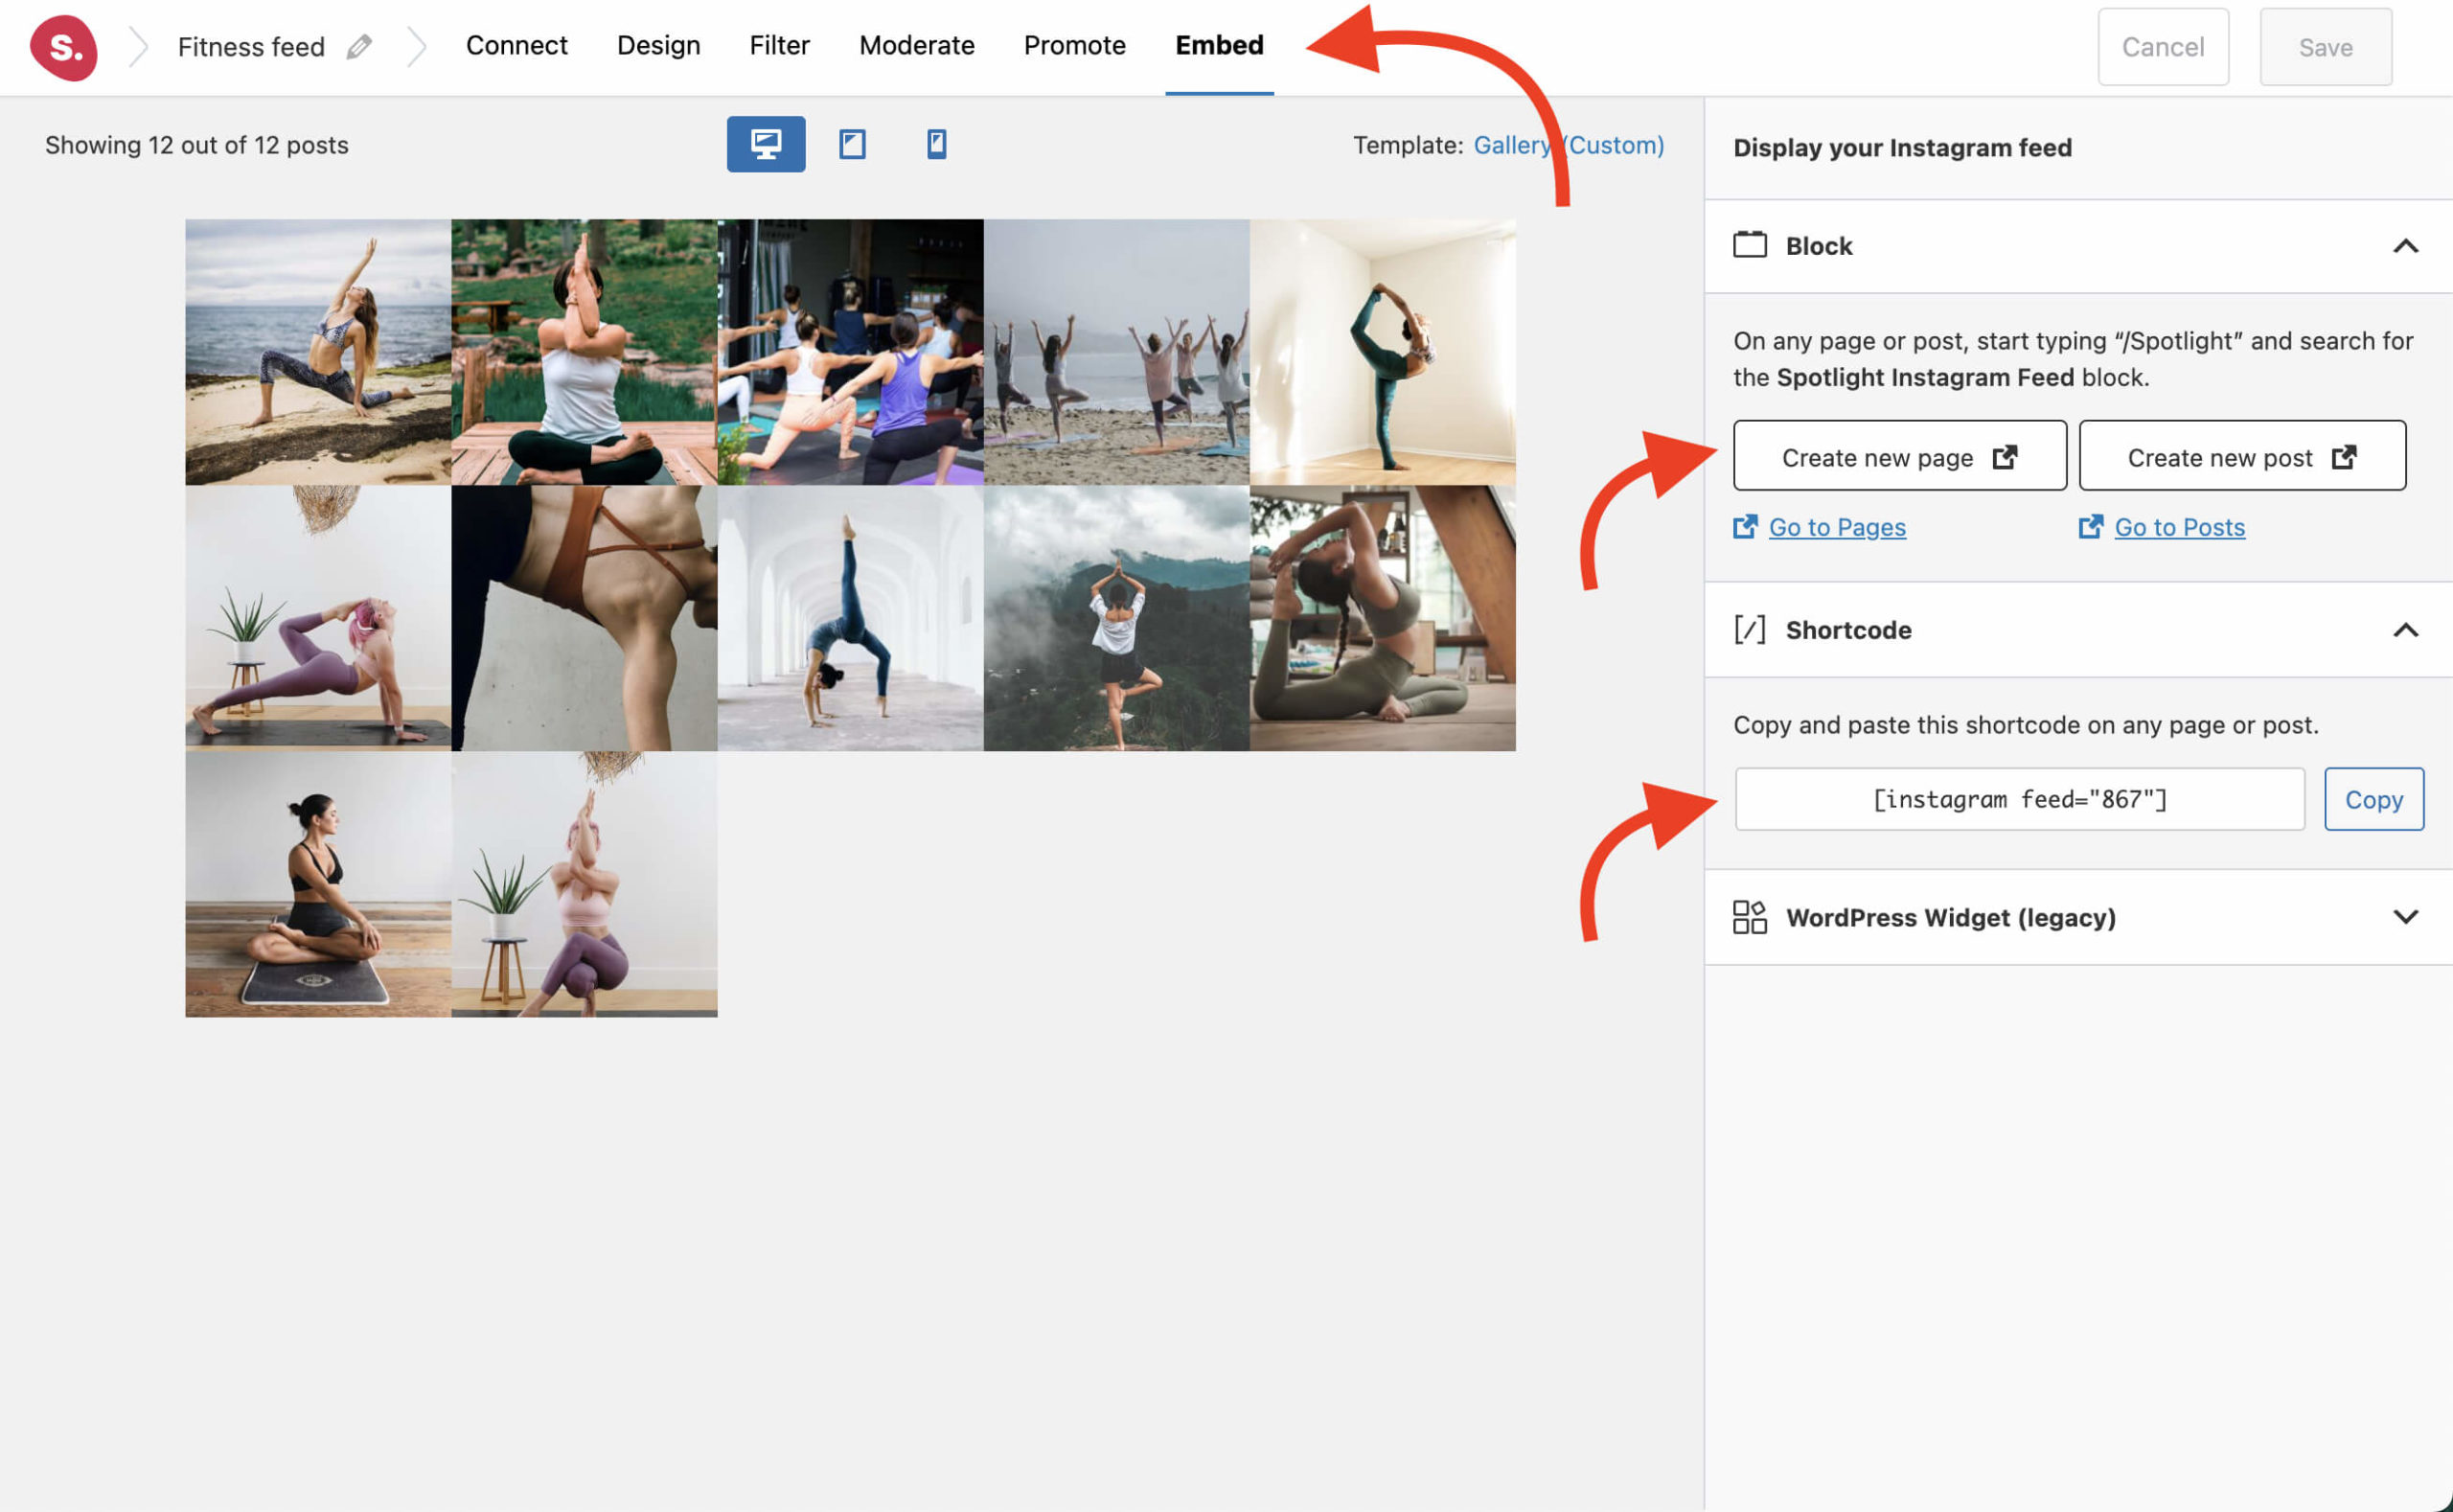 Embed your Instagram feed